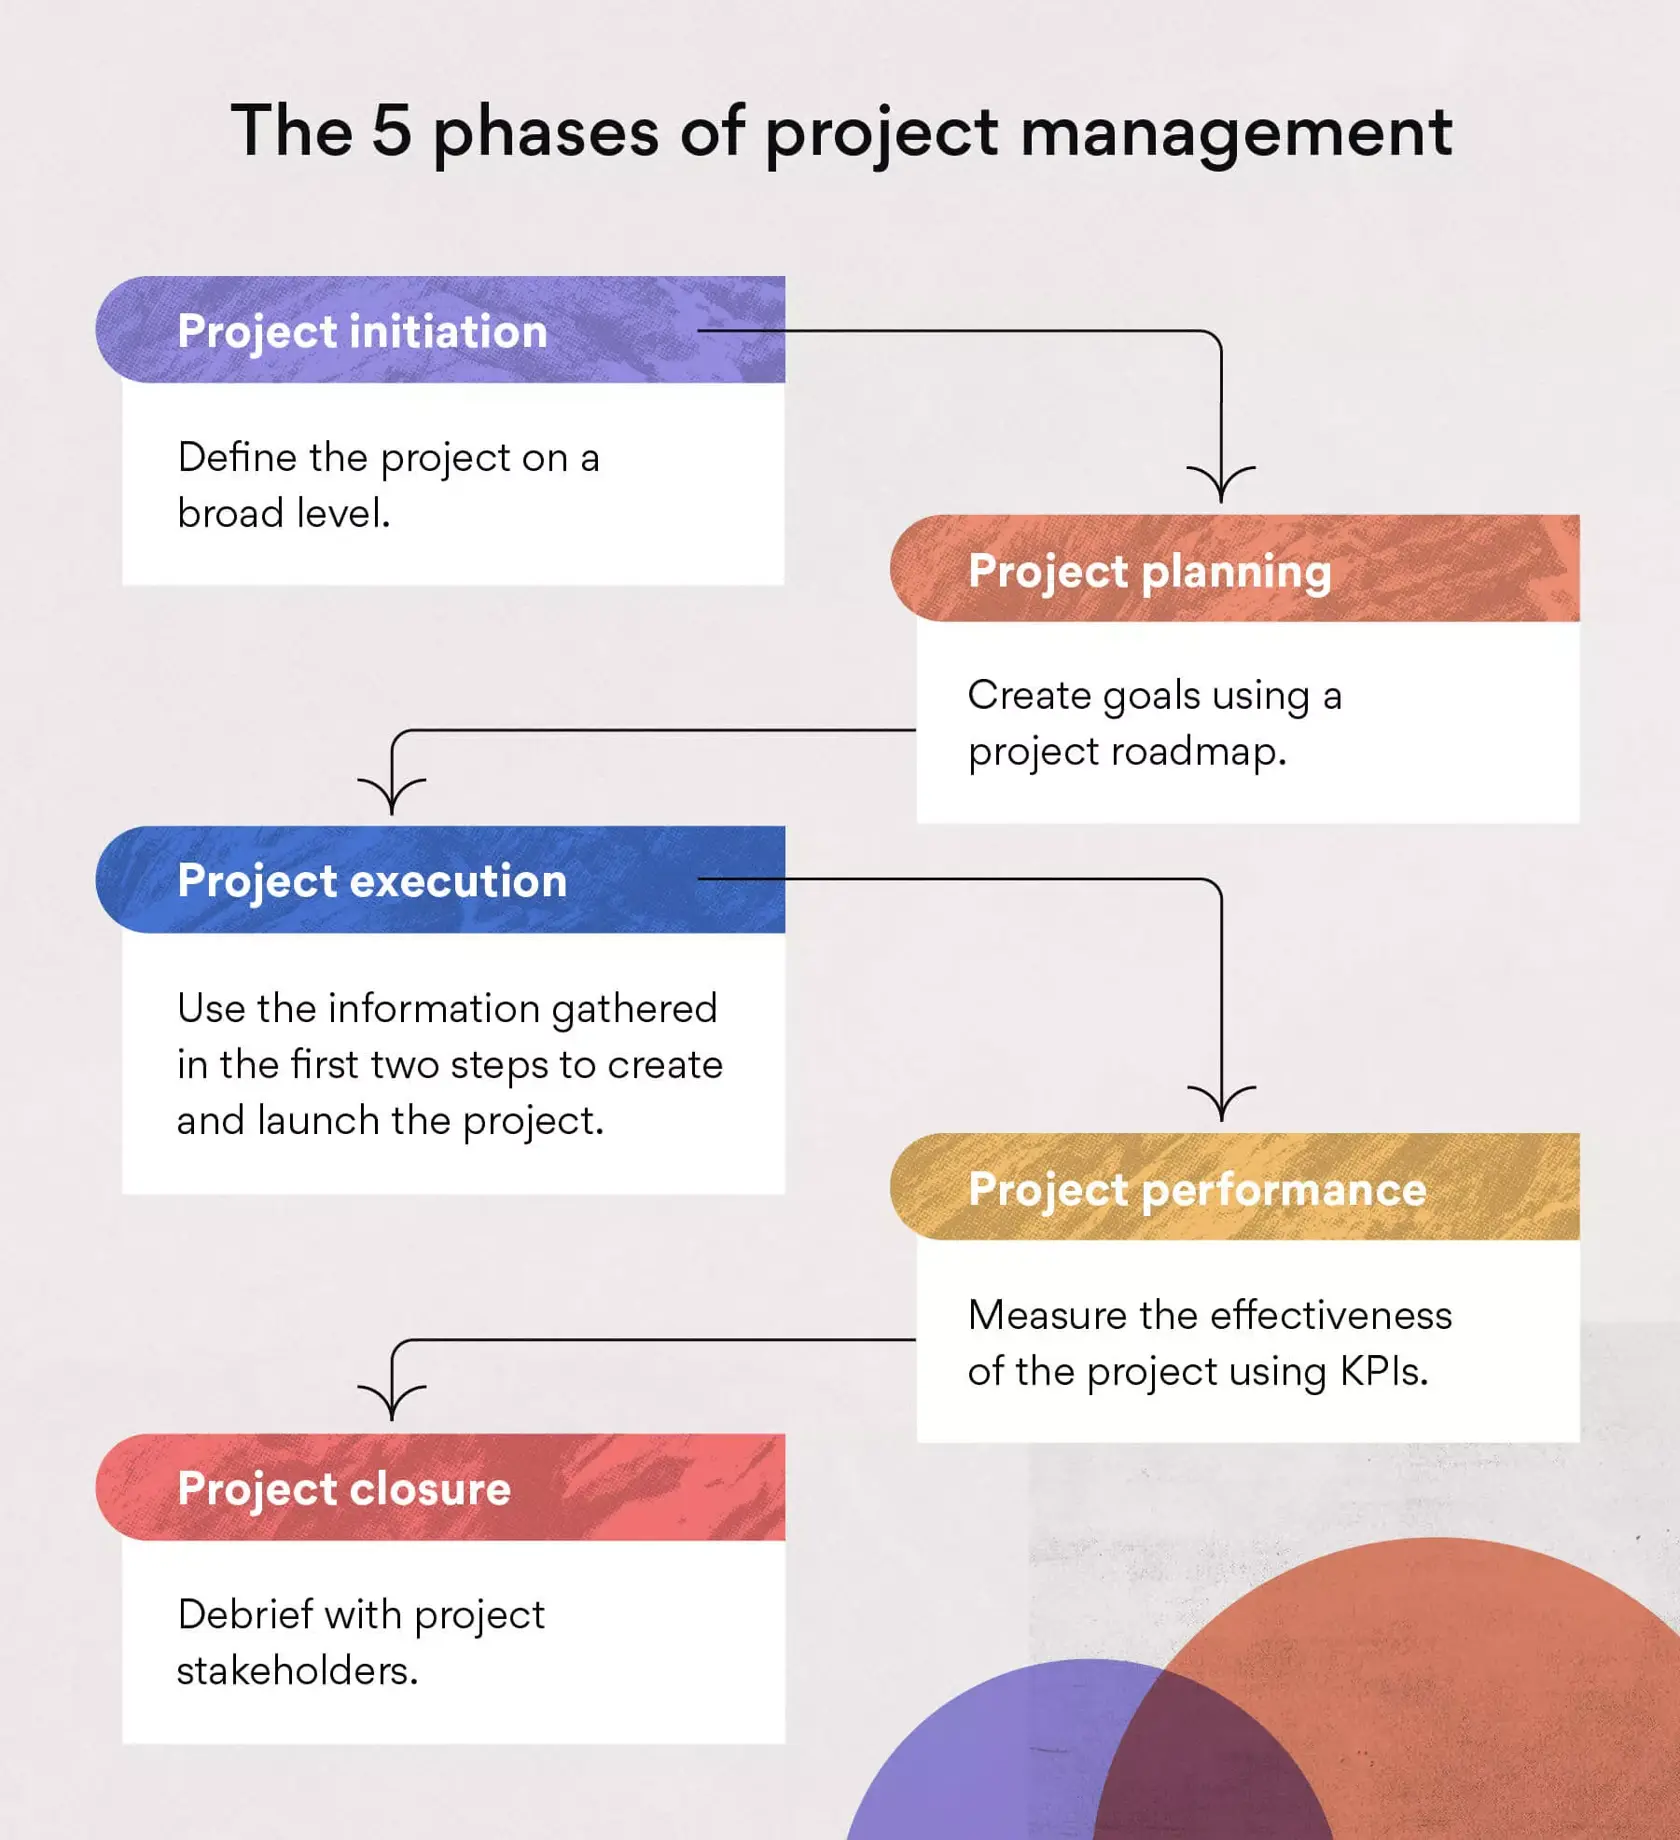 The 5 phases of project management